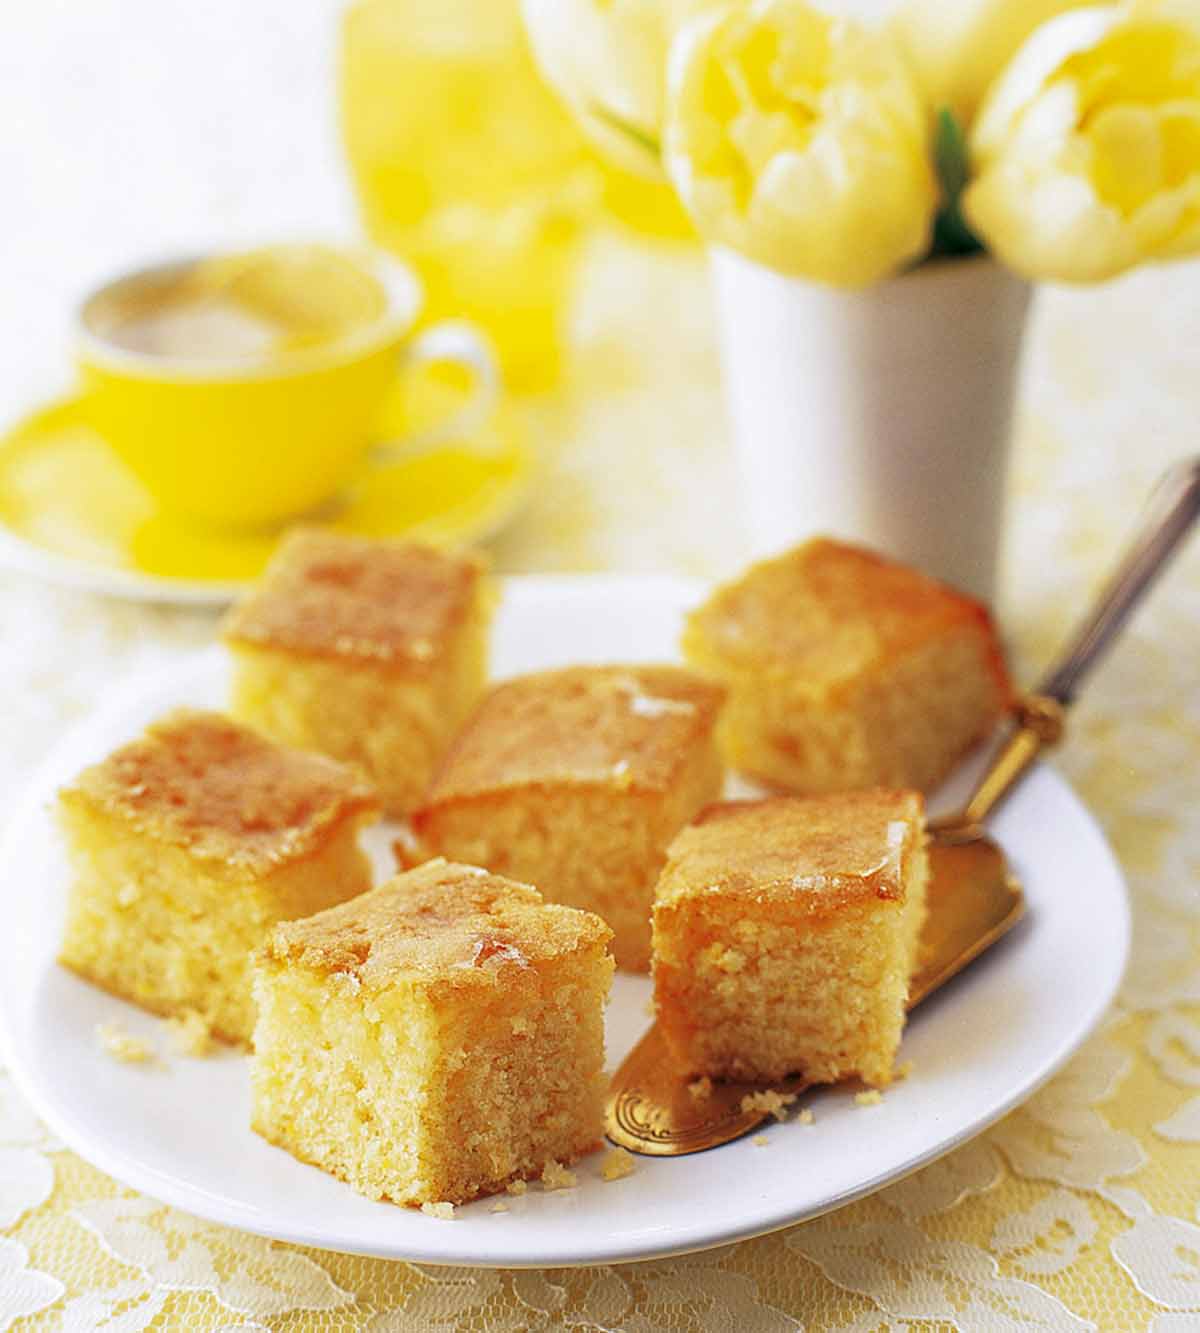 Squares of lemon drizzle cake on a white plate with a cake server resting underneath and a cup of tea and vase of flowers in the background.